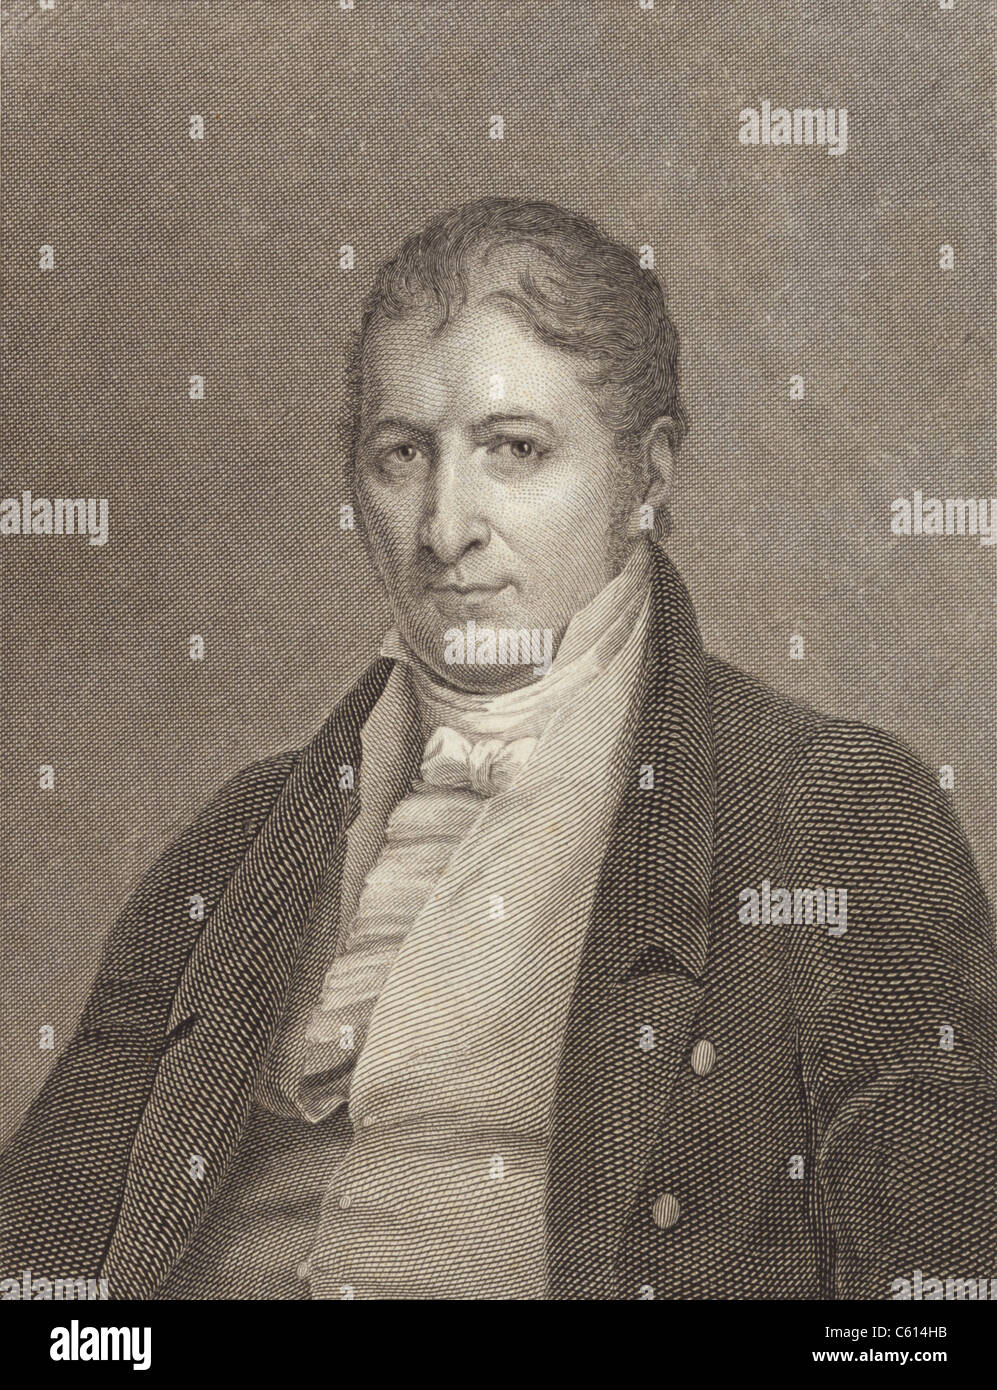 Eli Whitney 1765-1825 inventor and manufacturer famous for inventing the cotton gin and designing guns with interchangeable parts. Engraving by William Hoogland after Charles Bird King 1785-1862 painting. (BSLOC 2010 18 167) Stock Photo